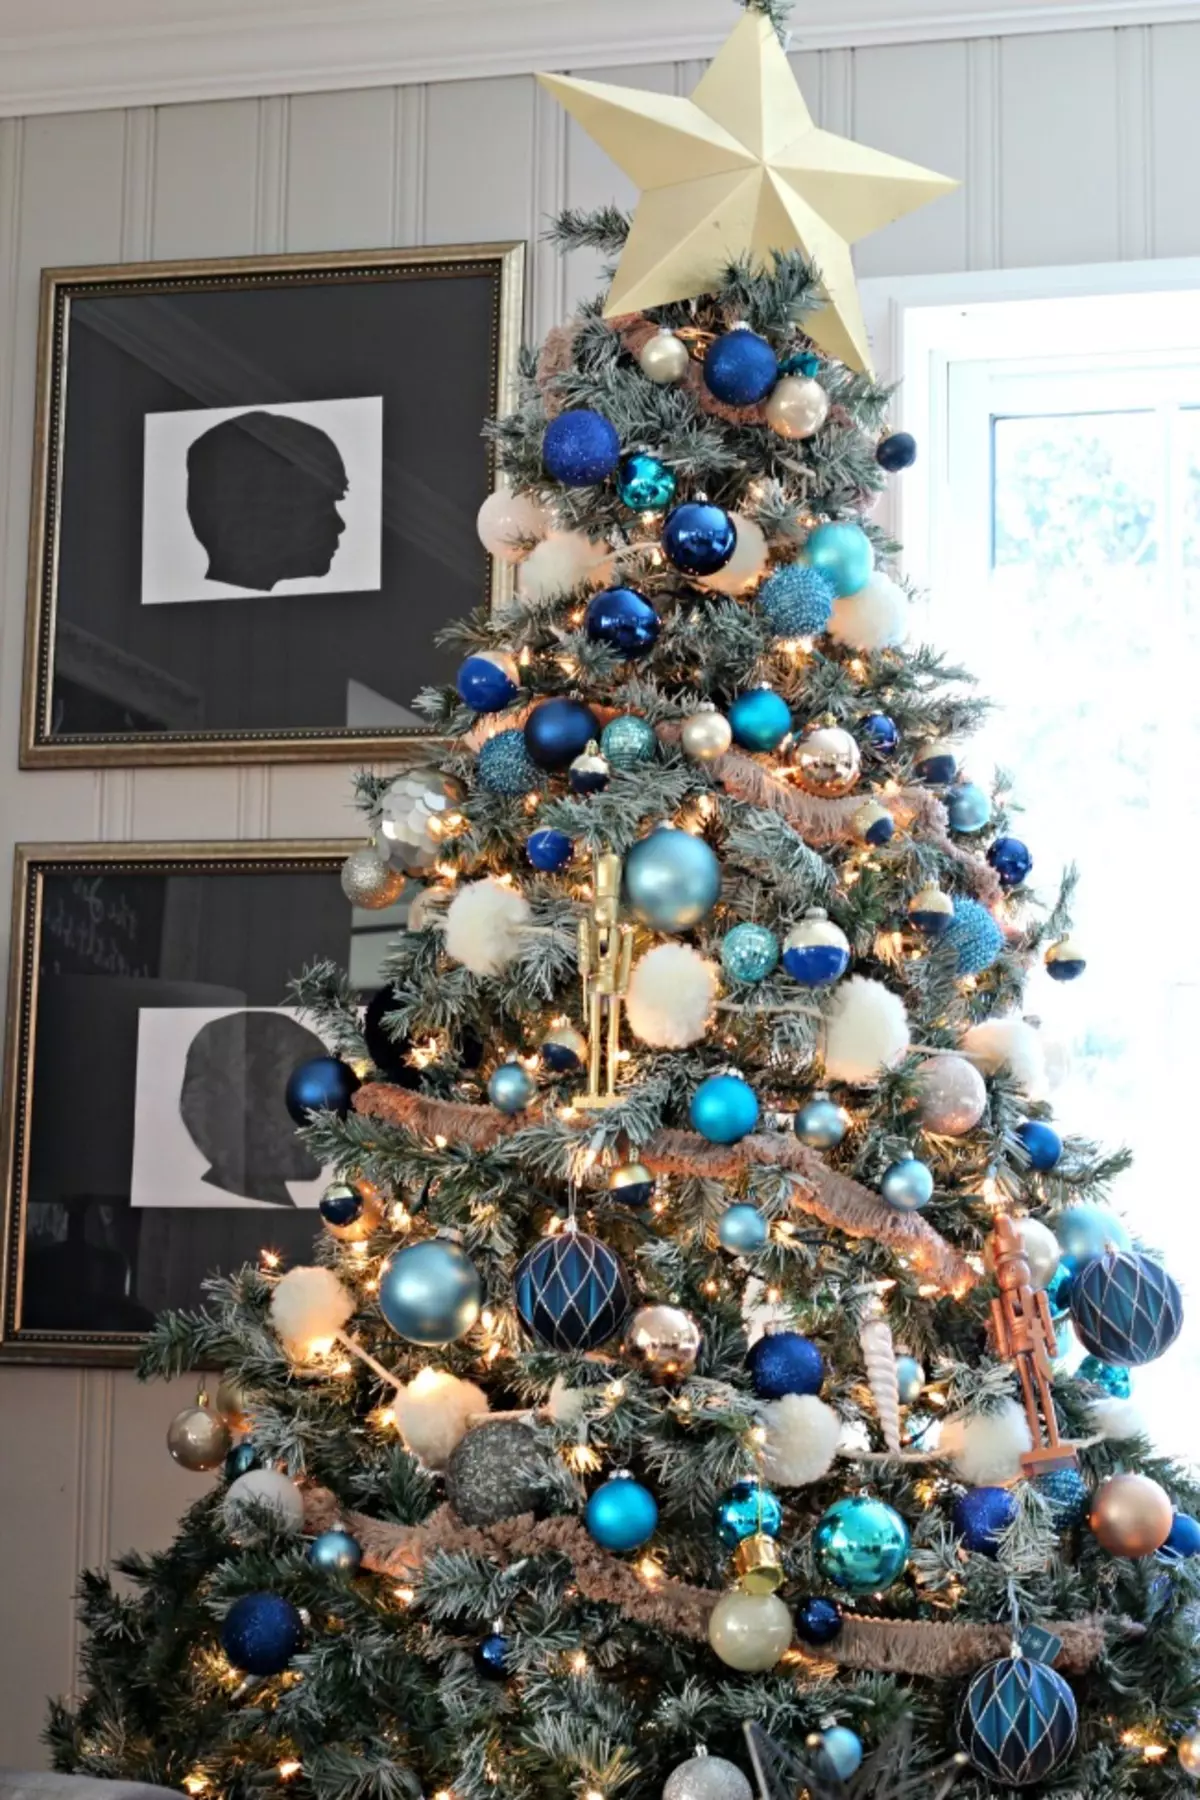 How to decorate the Christmas tree in blue-silver color? 30 photos How to dress up with balls and other decorations in blue and silver tones? 7627_9